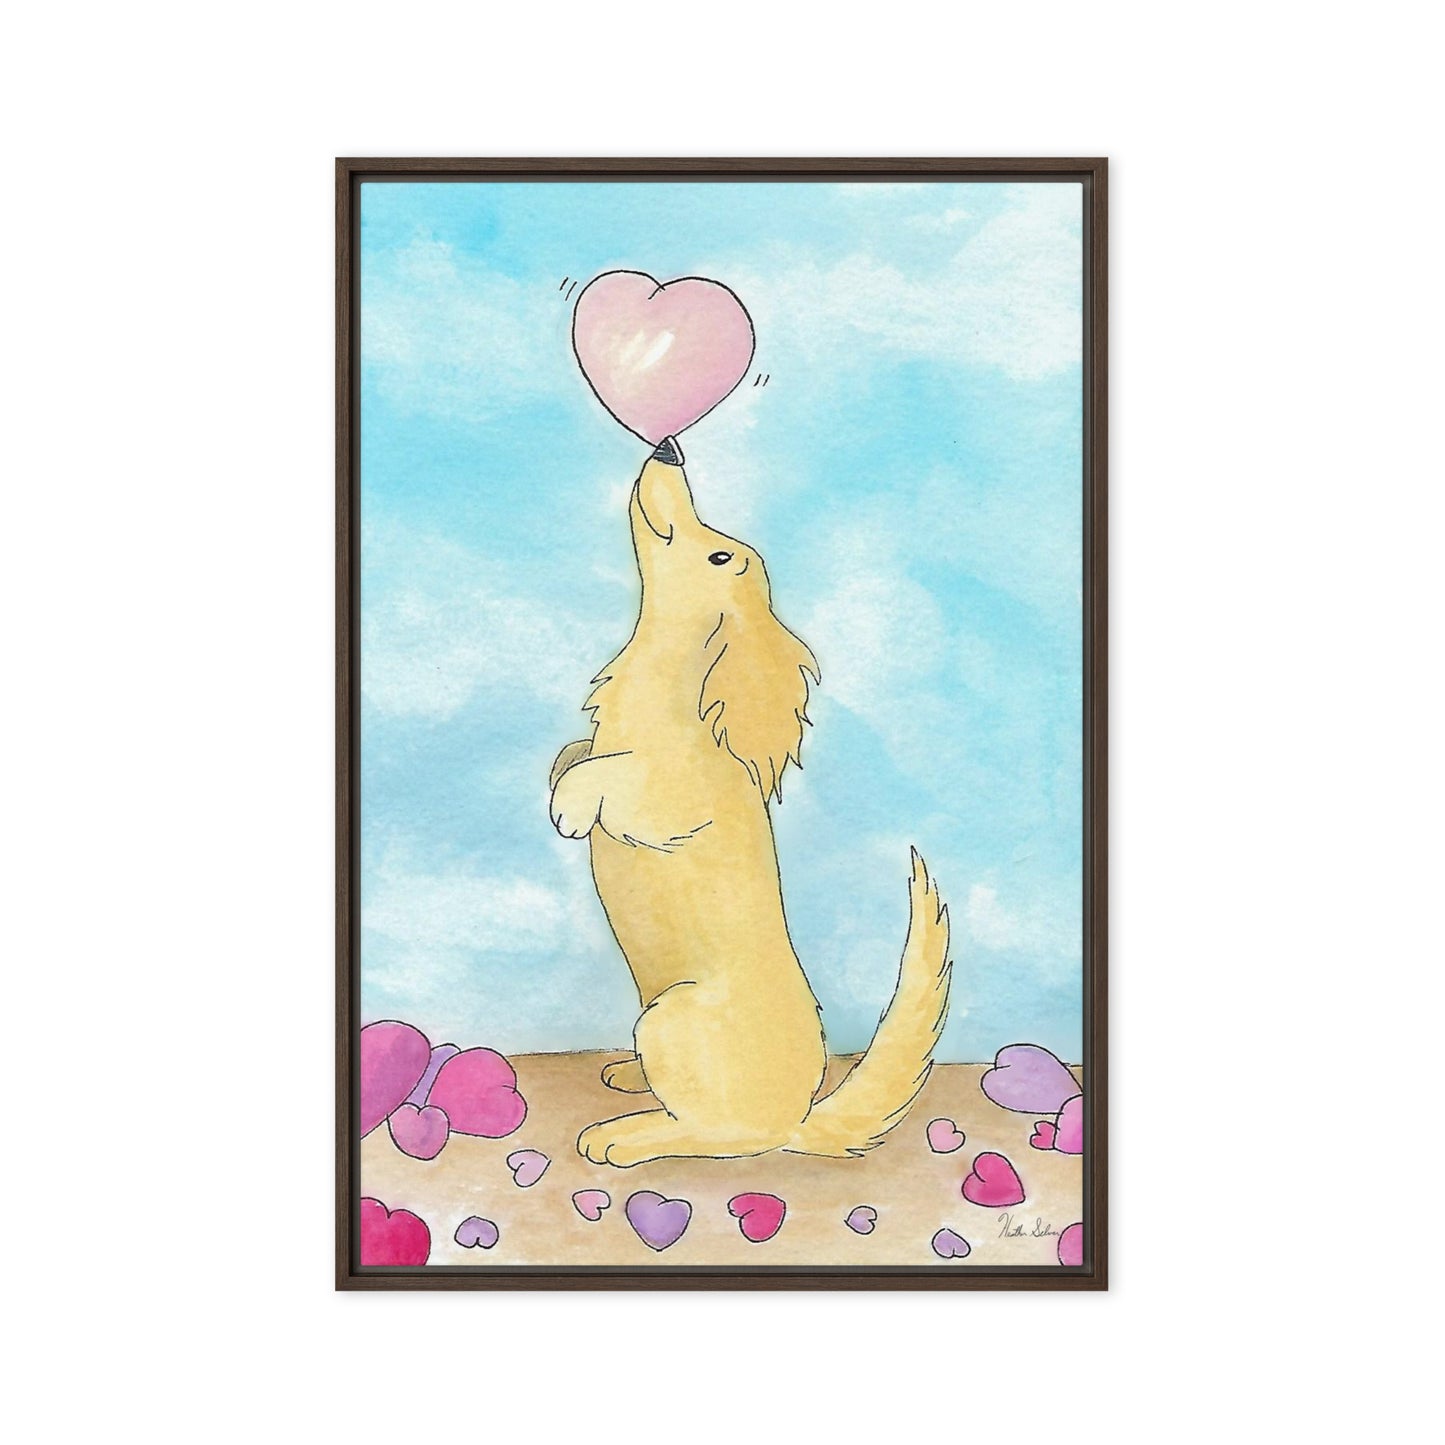 24 by 36 inch framed canvas Puppy Love print. The canvas is in a brown pine wood frame.